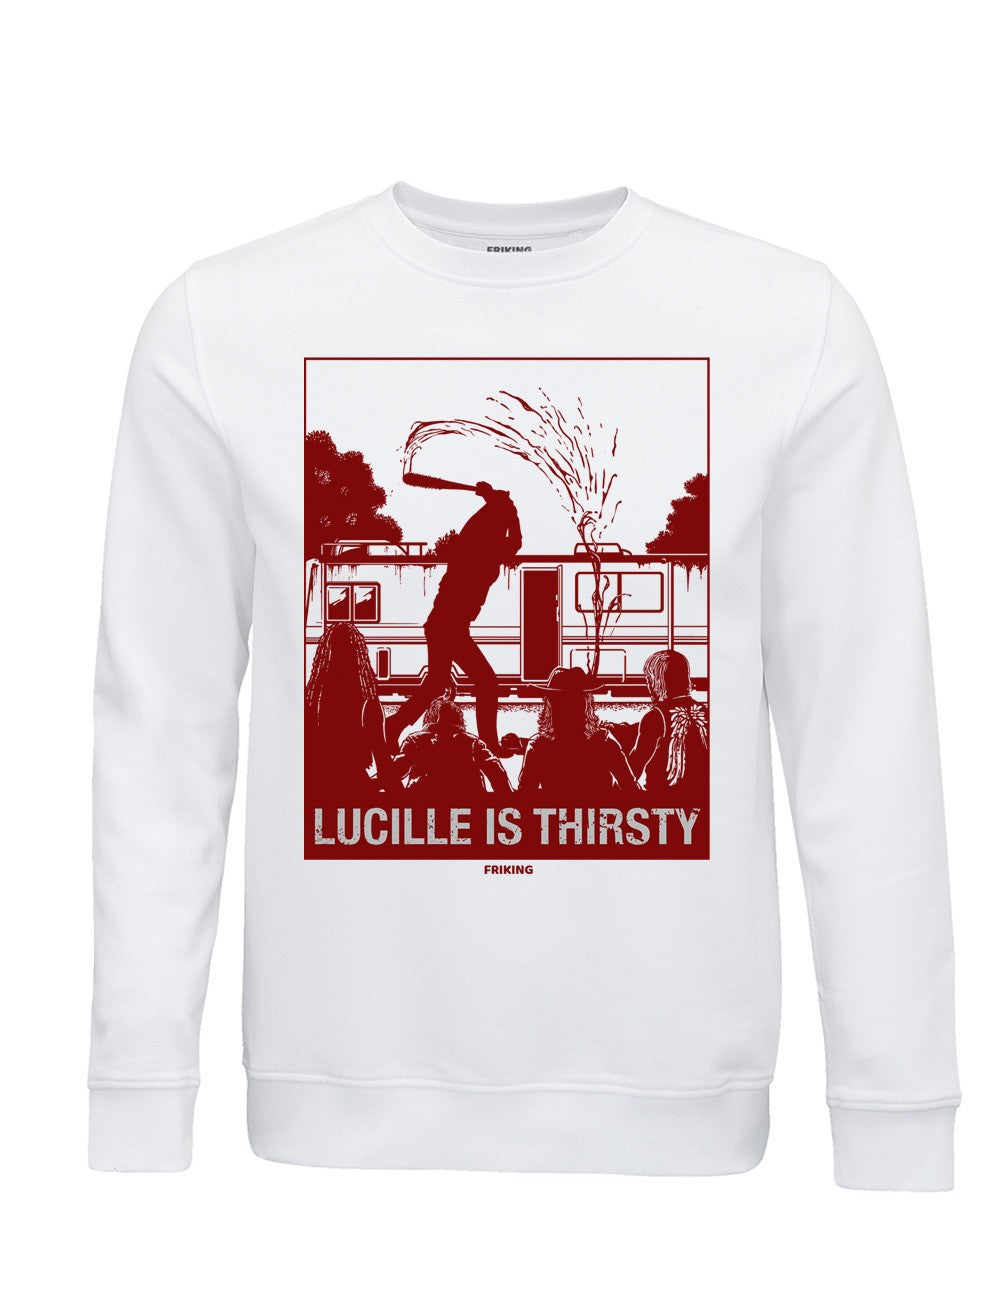  Lucille Is Thristy 